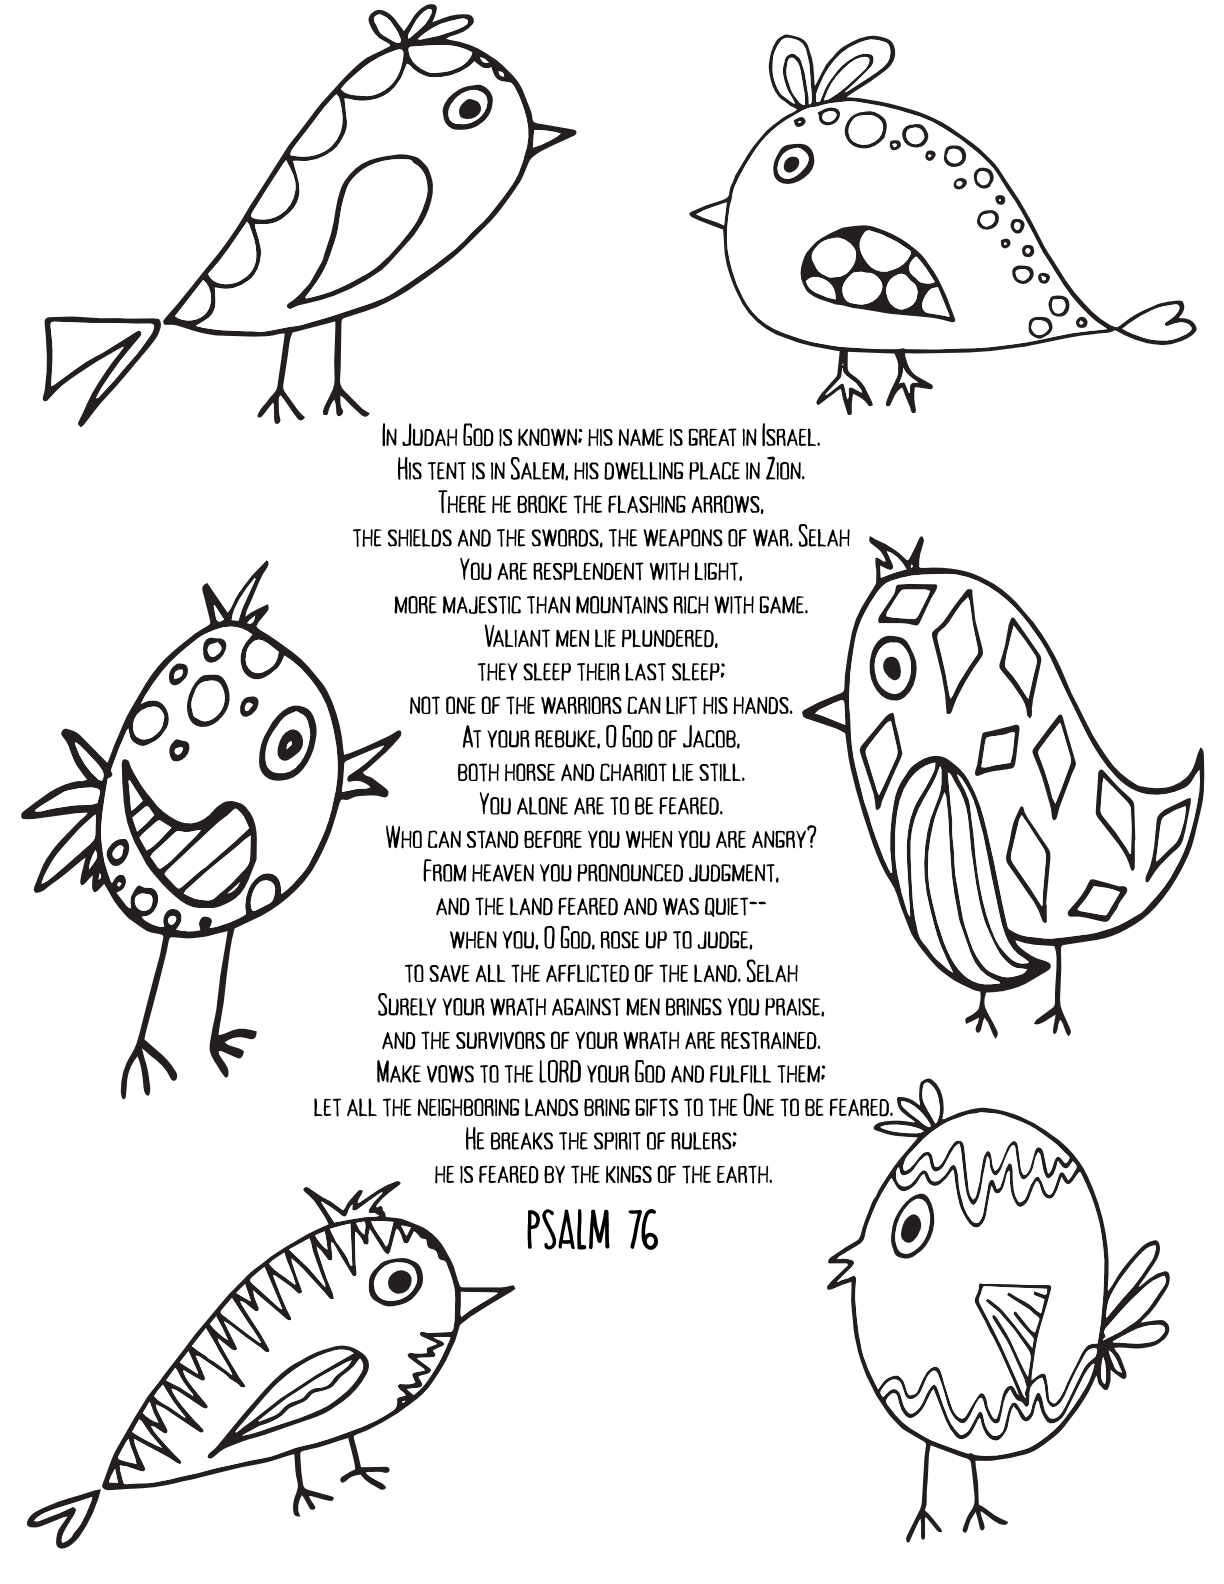 10 Free Printable Psalm Coloring Pages - Download and Color Adult Scripture - Psalm 76CLICK HERE TO DOWNLOAD THIS PAGE FREE